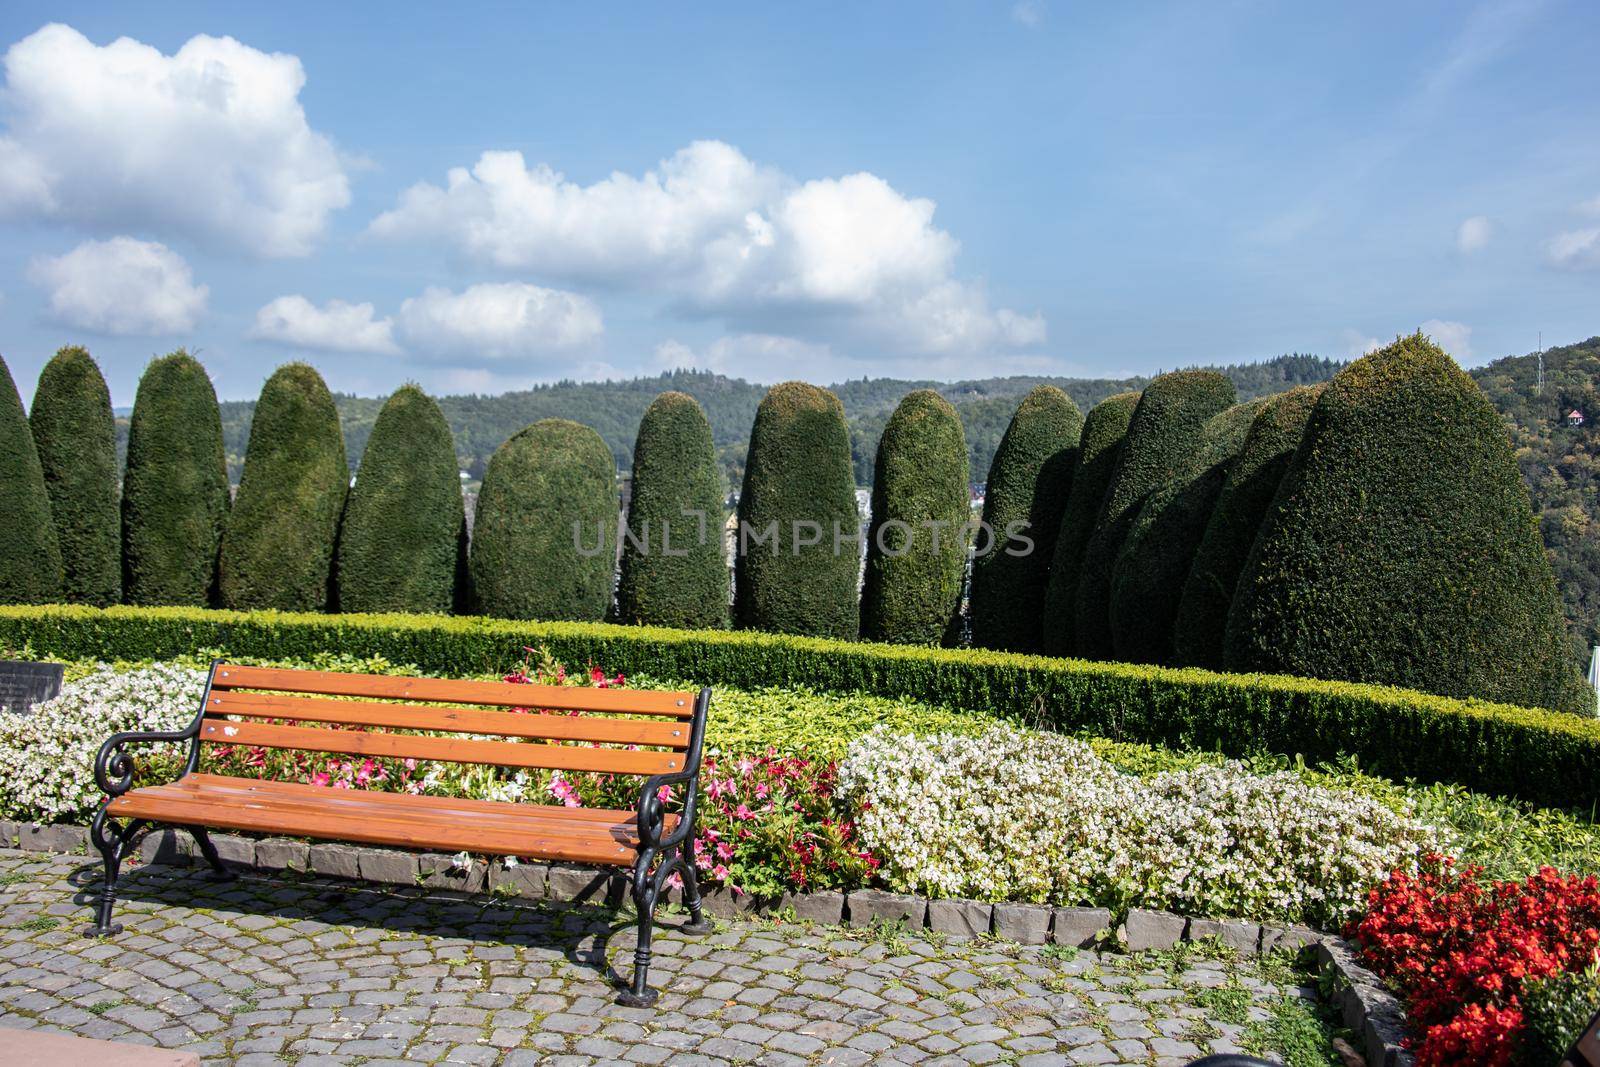 colored plants and fowers in the Dillenburg Park